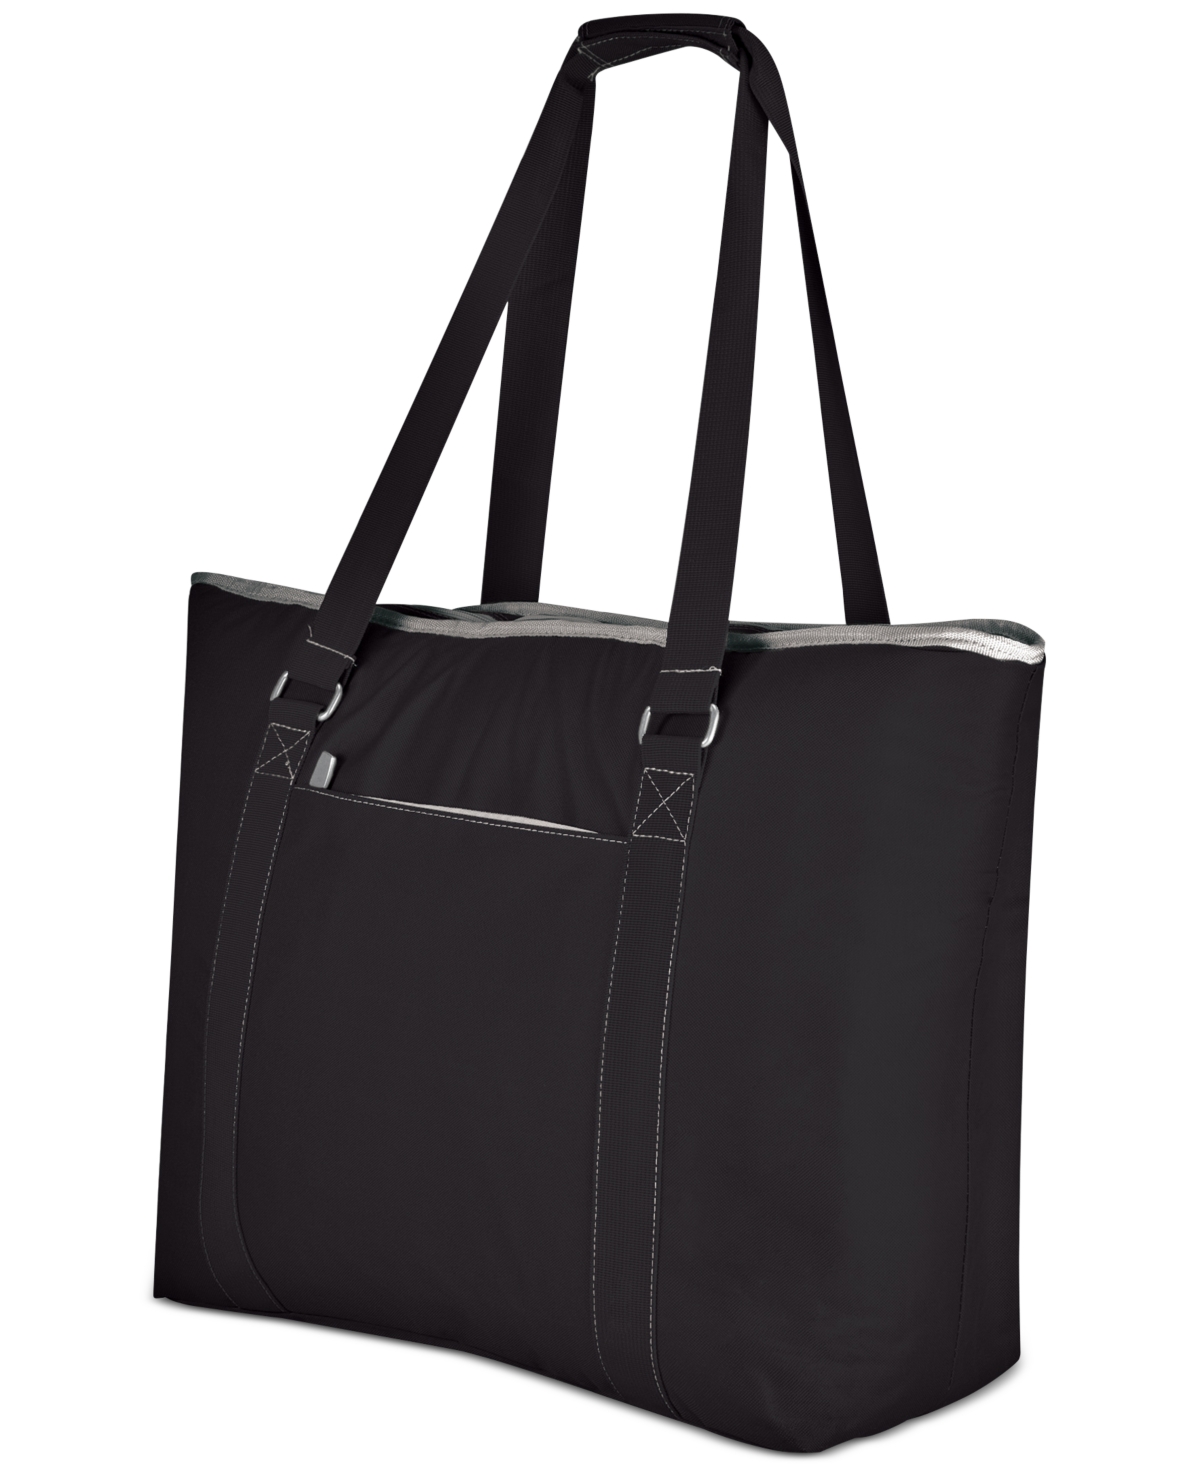 by Picnic Time Tahoe Xl Cooler Tote Bag - Black